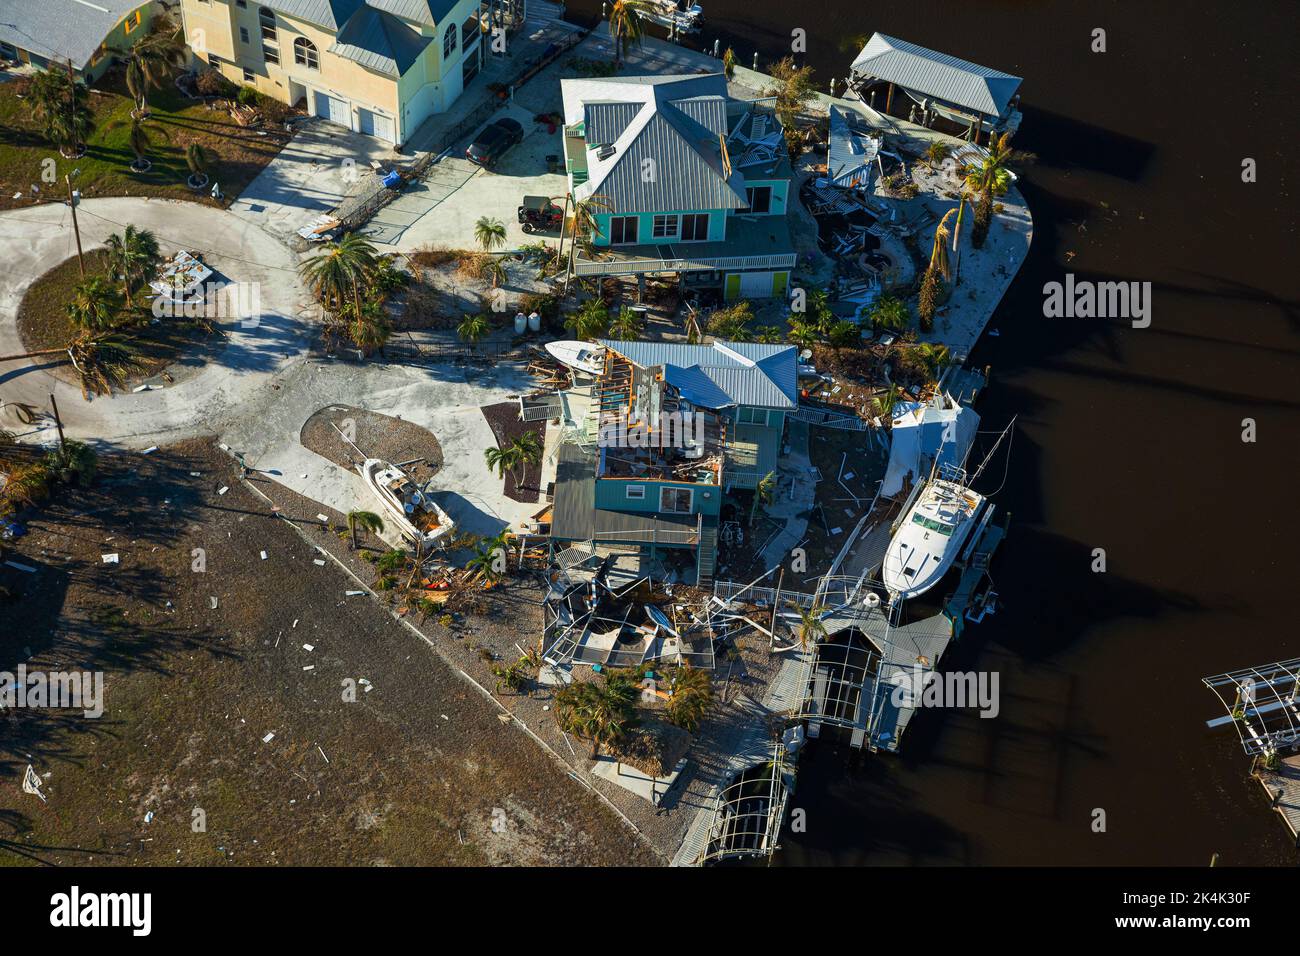 NEAR FORT MYERS, FLORIDA, USA - 30 September 2022 - Aerial view of the aftermath along Florida's coast after Hurricane Ian made landfall. The near Cat Stock Photo